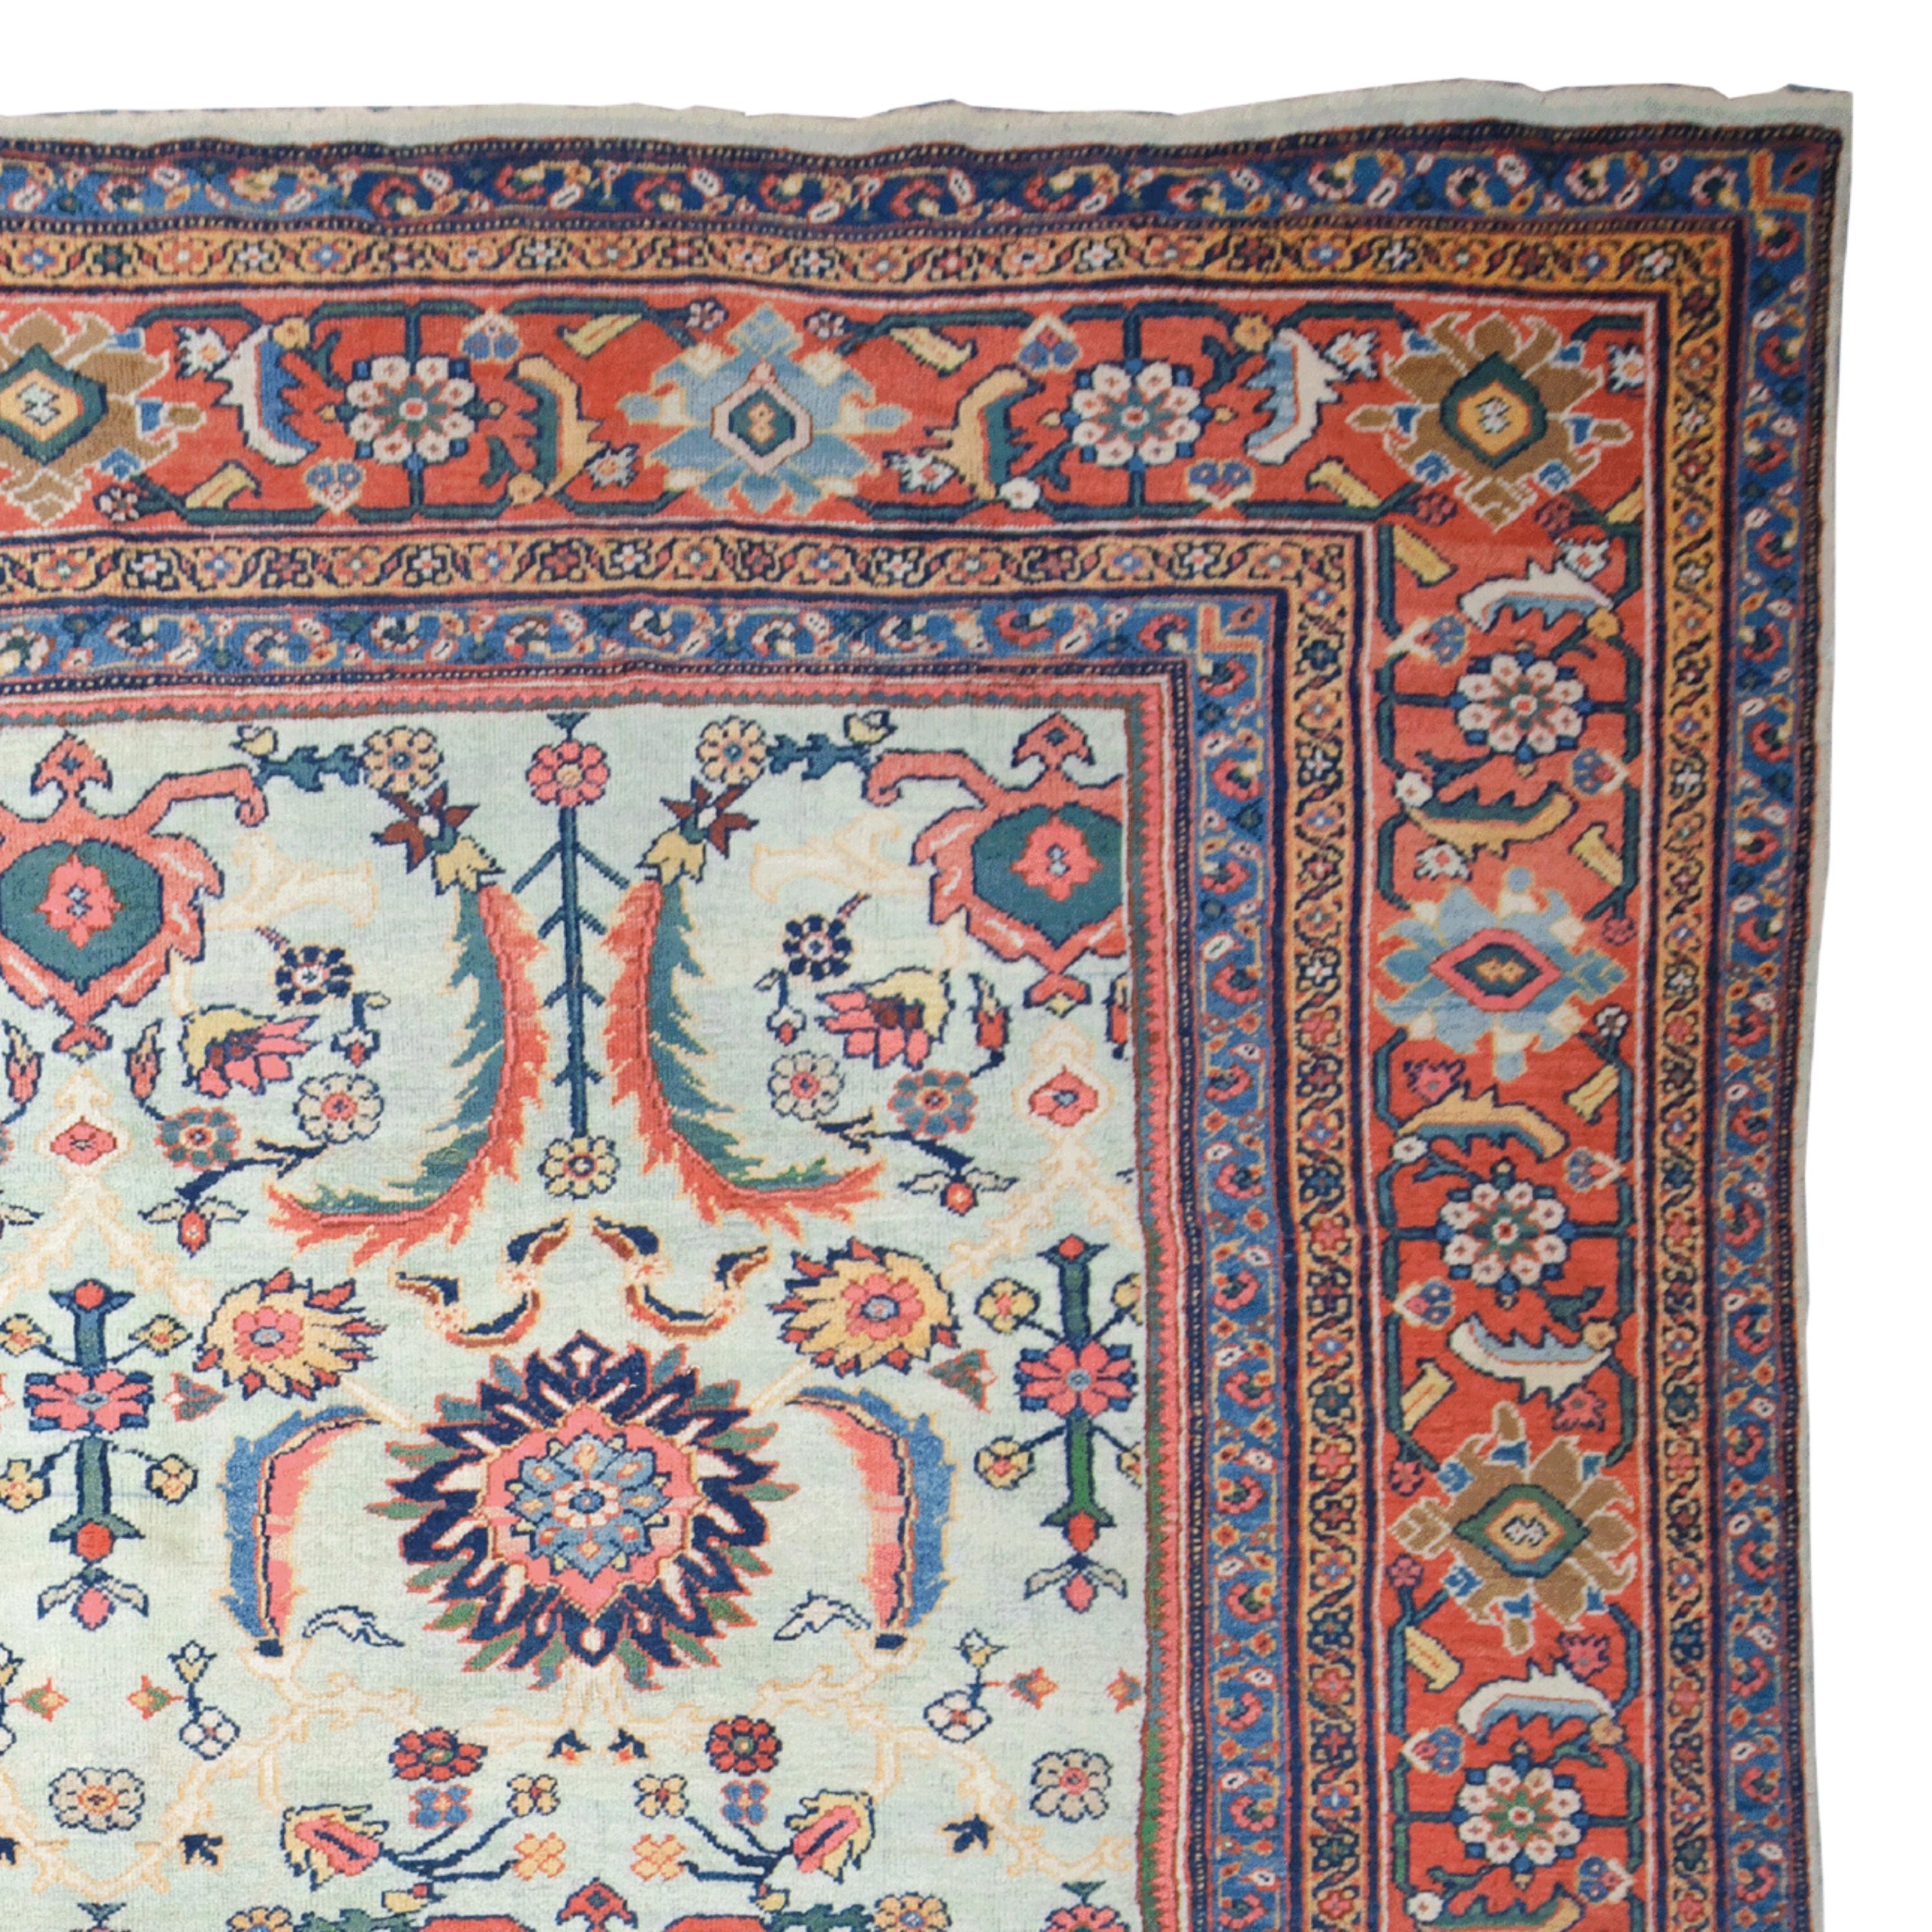 Antique Mahal Rug - Late of 19th Century Mahal Rug, Antique Rug, Vintage Rug In Good Condition For Sale In Sultanahmet, 34